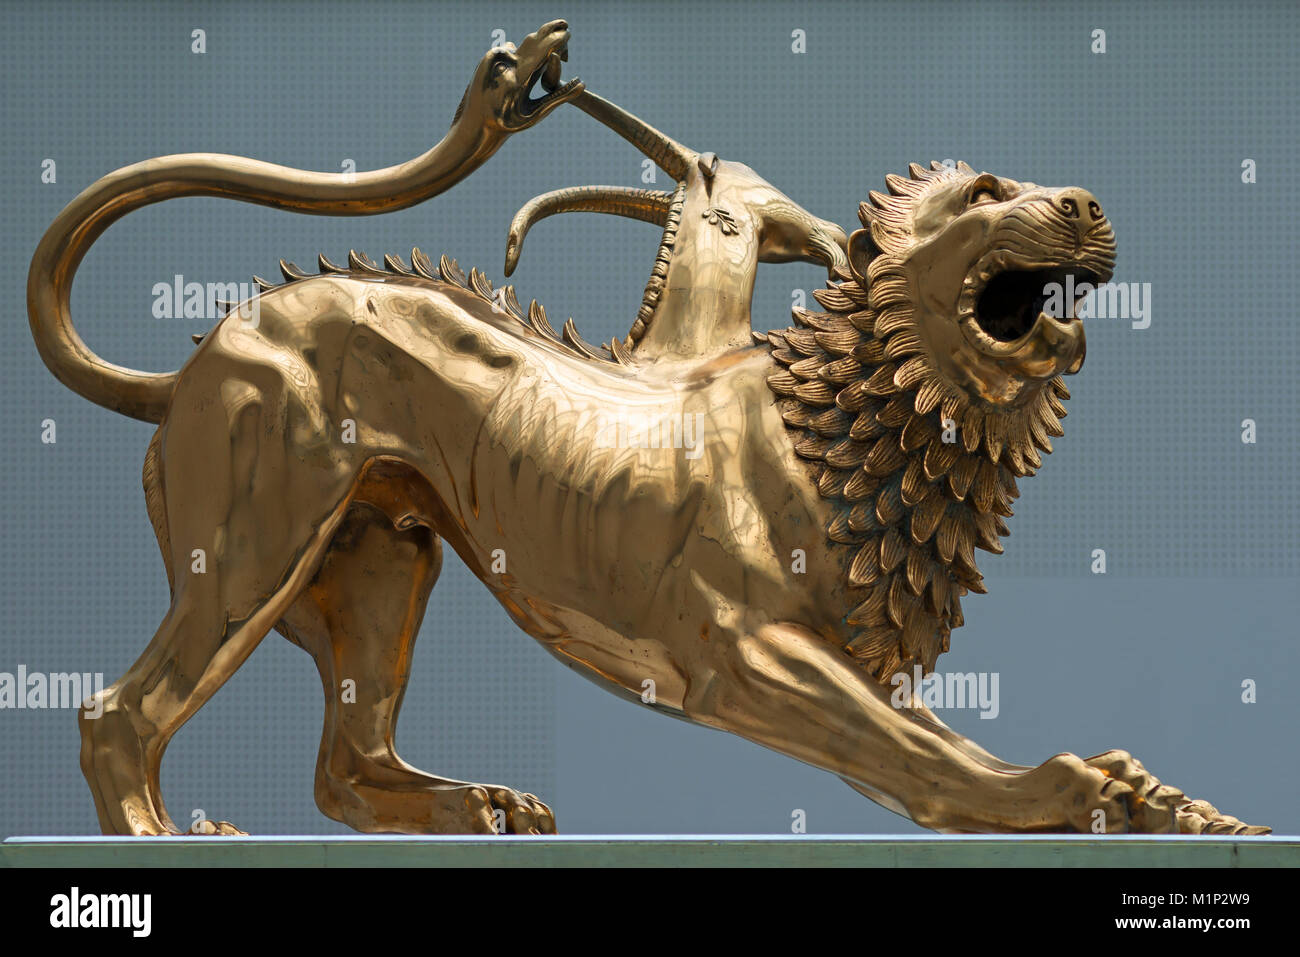  A golden sculpture of a griffin with a snake biting its neck.